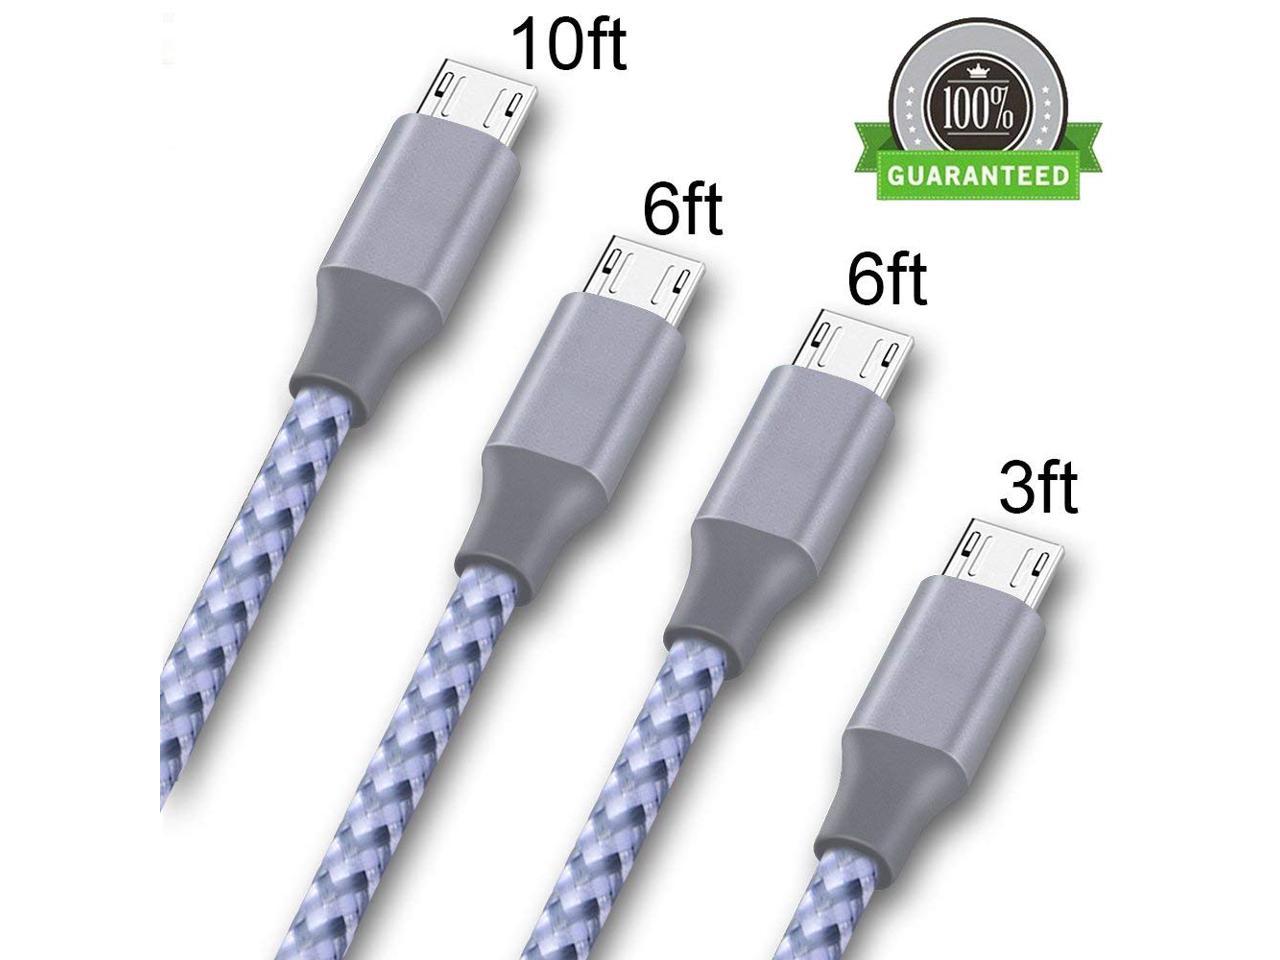 Gold Silver Suanna Phone Charger 4Pack 3FT 6FT 6FT 10FT Extra Long Nylon Braided USB Charging & Syncing Cord Compatible Phone Xs/Max/XR/X/8/8Plus/7/7Plus/6S/6S Plus/SE/Pad/Nan 